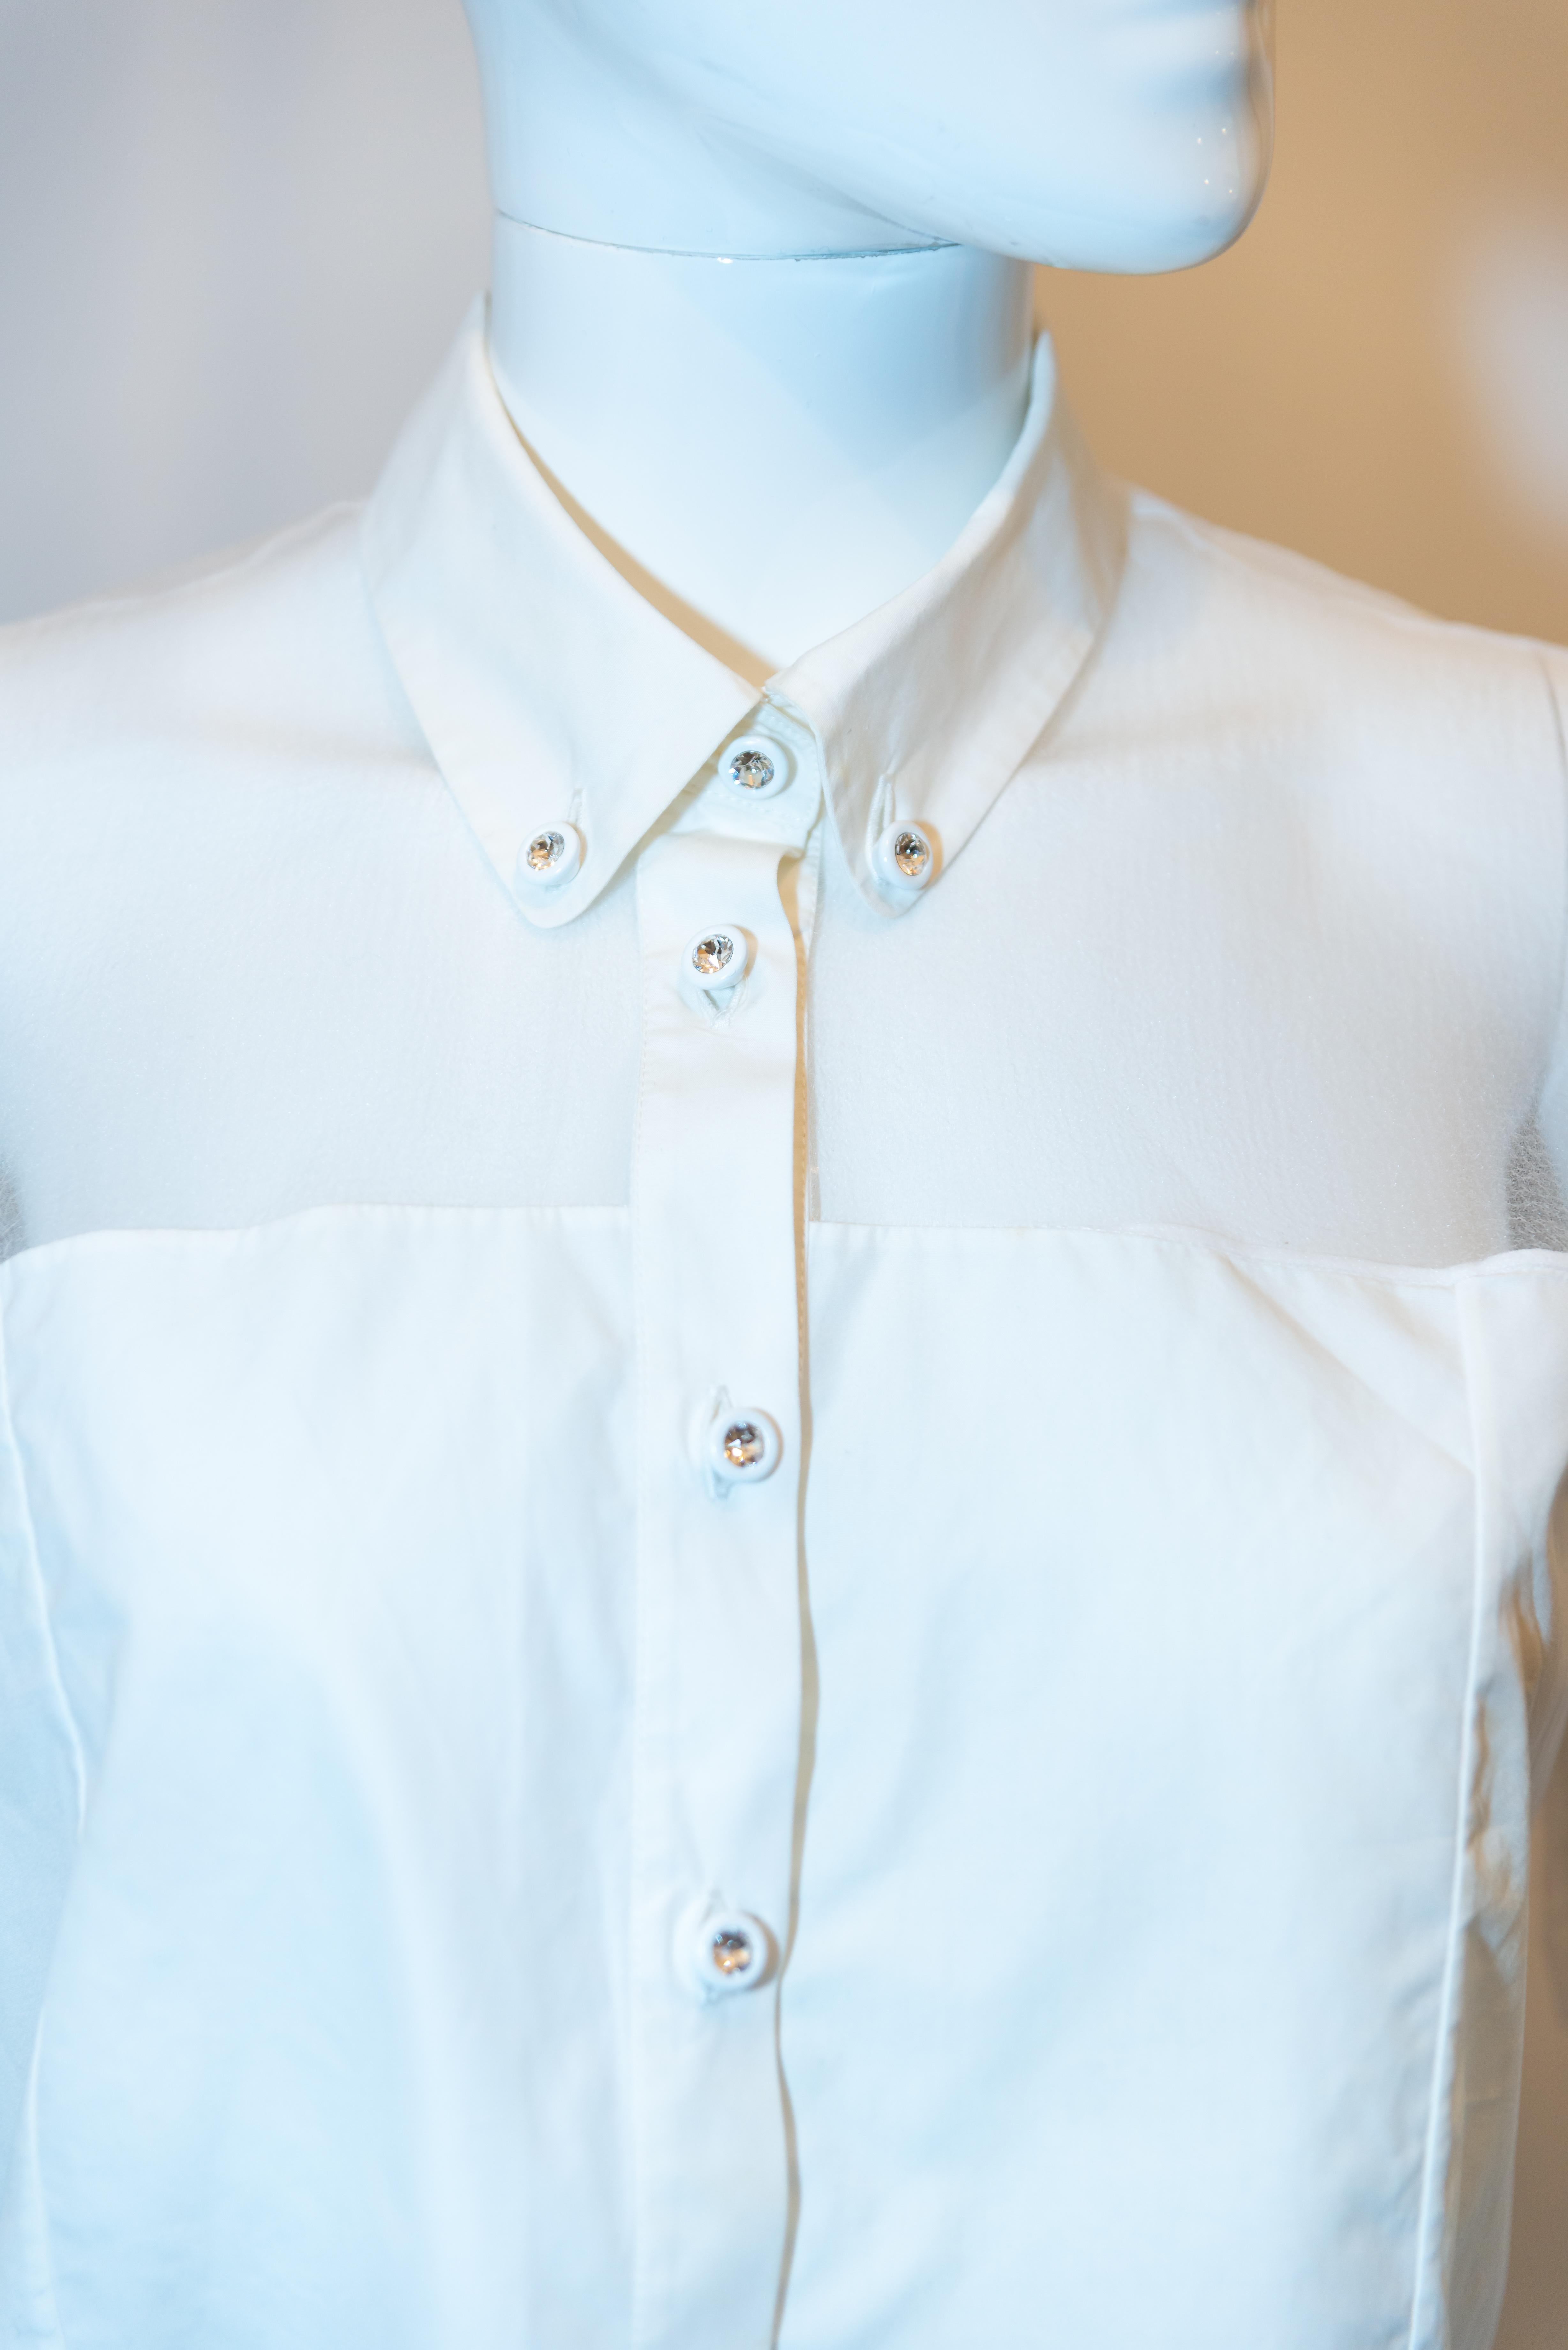 Christopher Kane White Shirt with Sheer Panels and Swarovski Buttons In Good Condition For Sale In London, GB